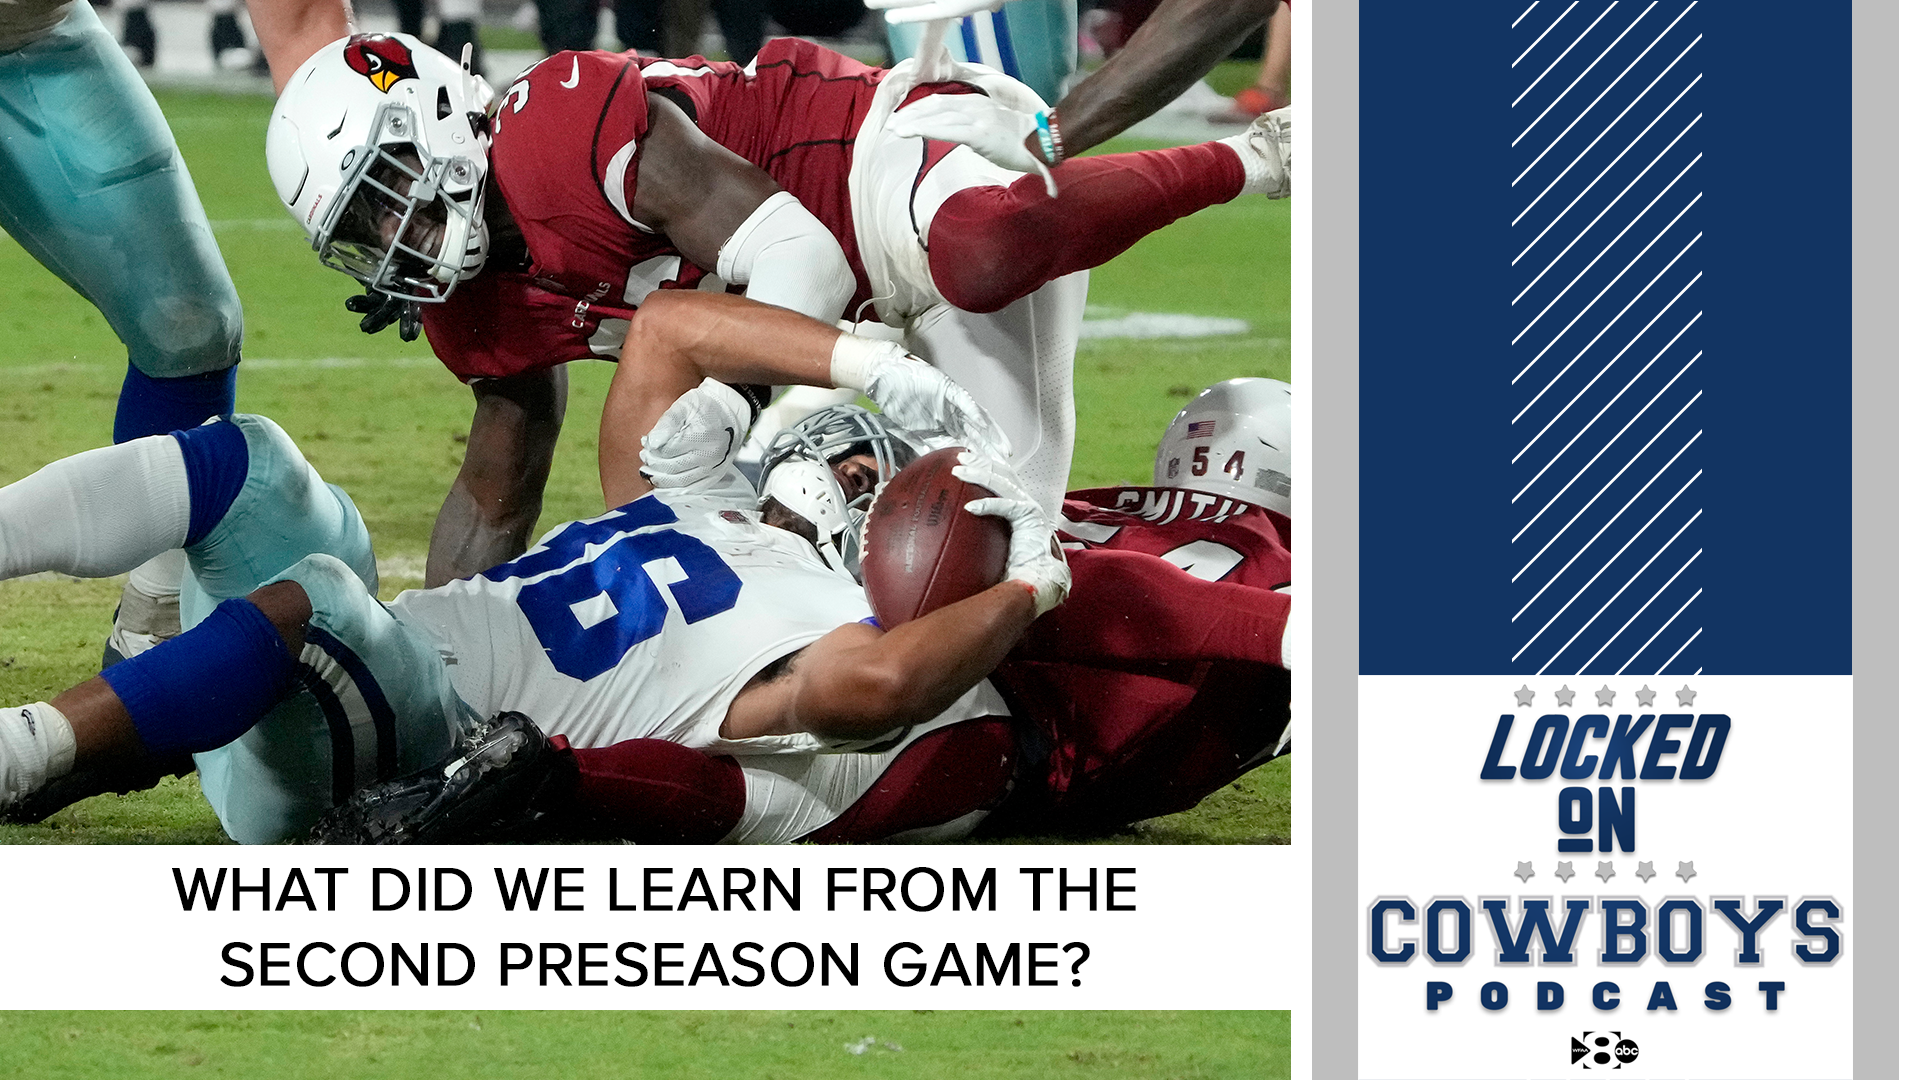 The Cowboys suffered some injuries in their preseason game against the Cardinals. @Marcus_Mosher and @McCoolBCB talk about the early season impact they could have.